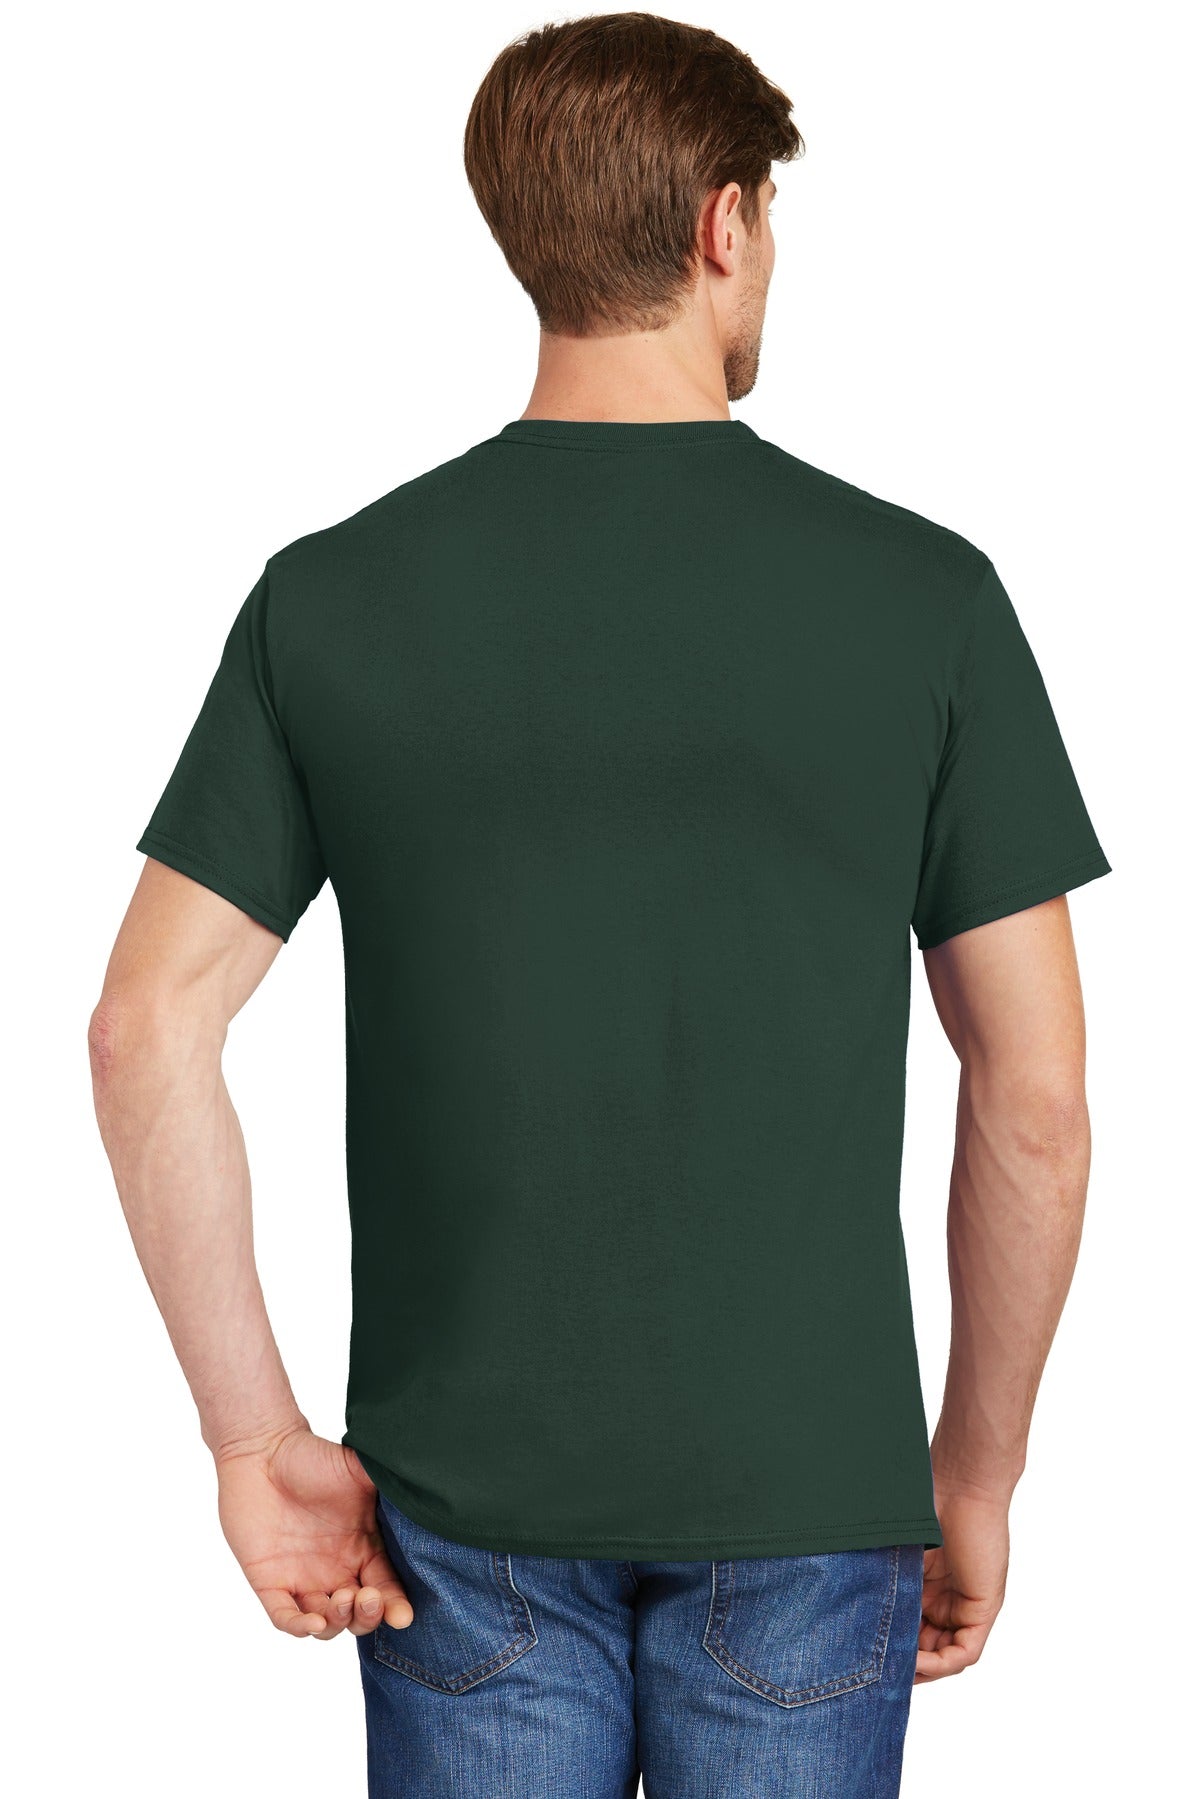 Hanes - Authentic 100% Cotton T-Shirt with Pocket. 5590